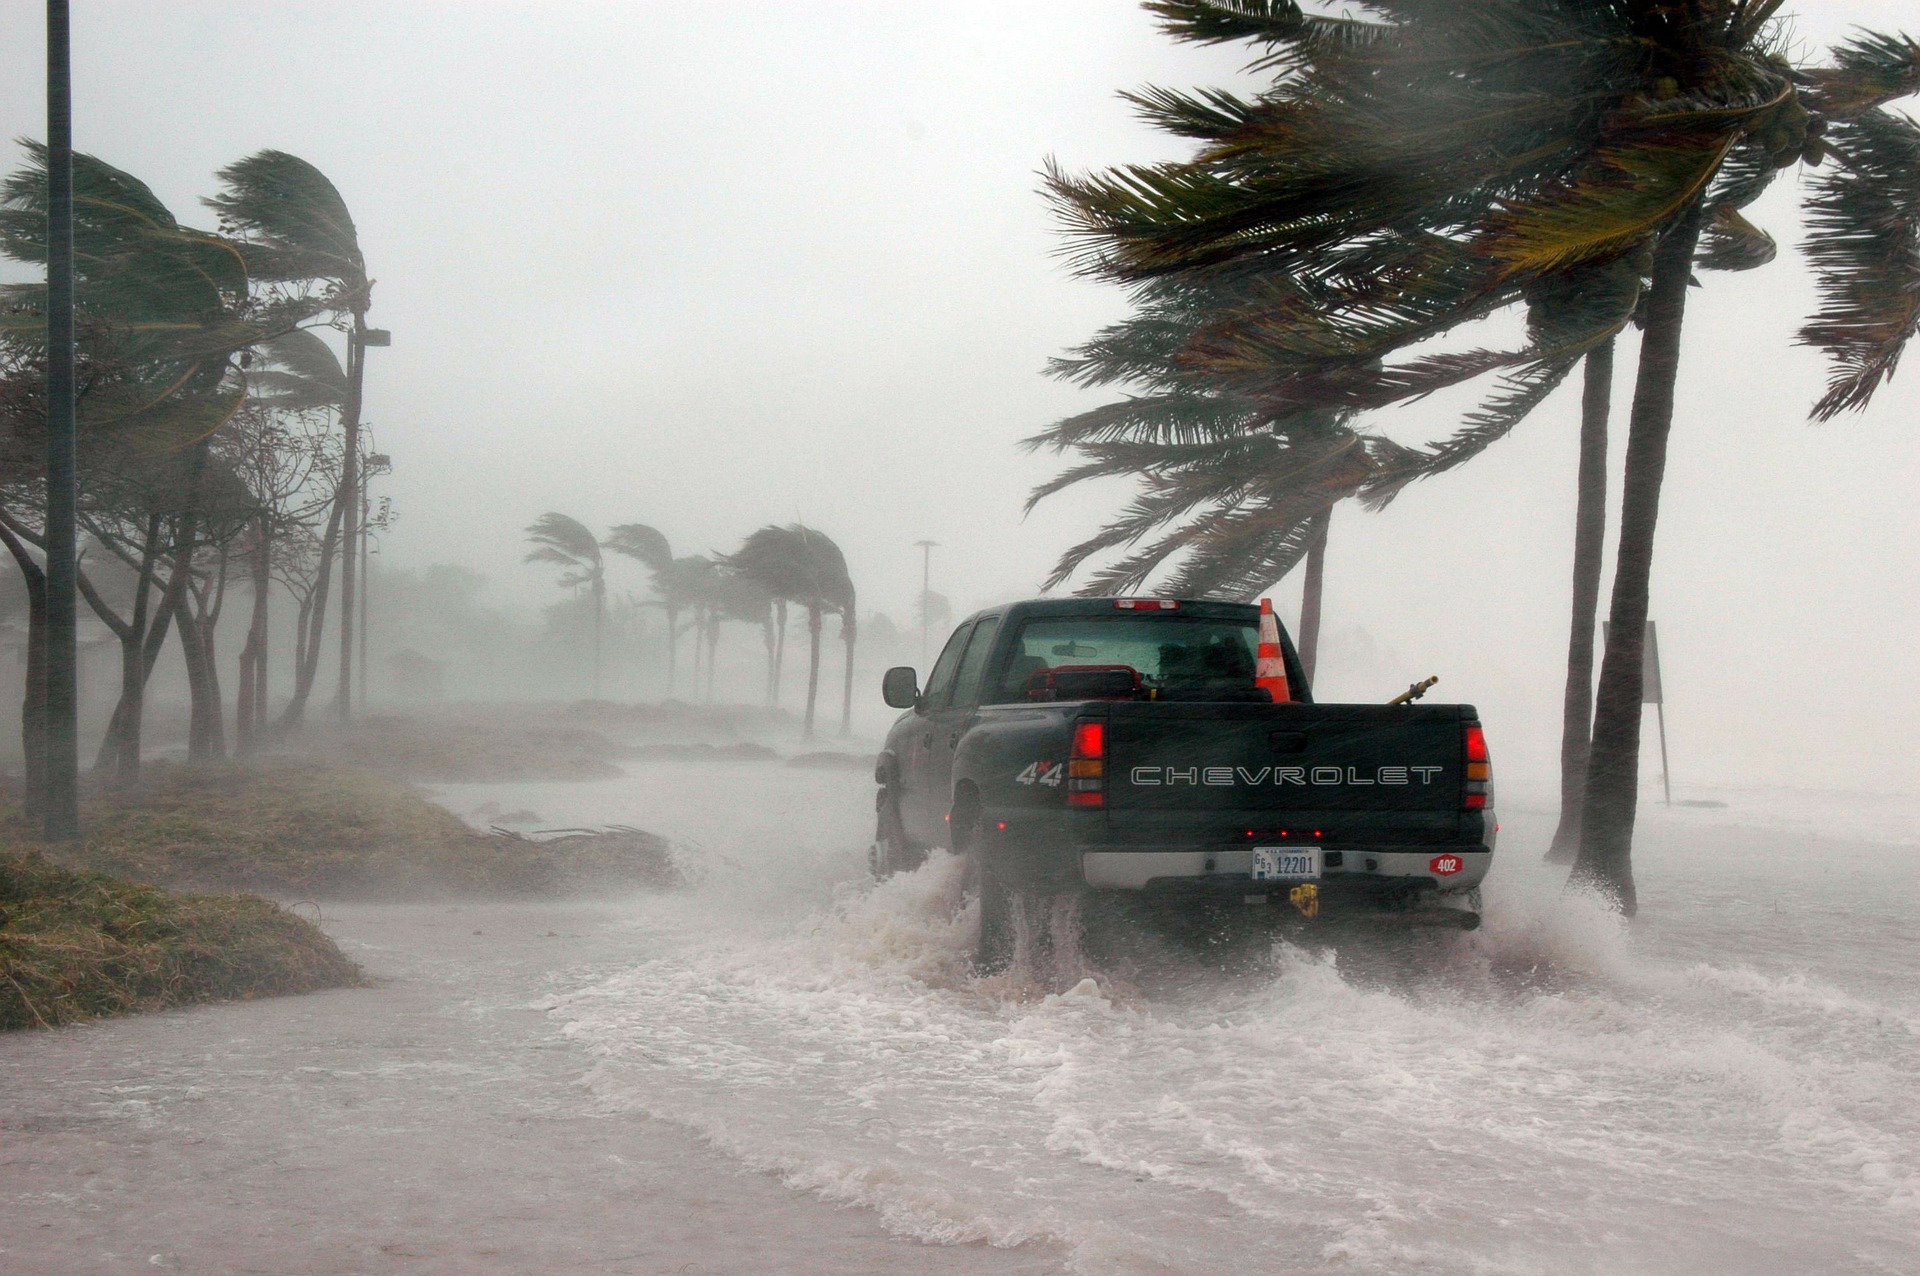 8 Astounding and Interesting Facts About Hurricanes and Storms